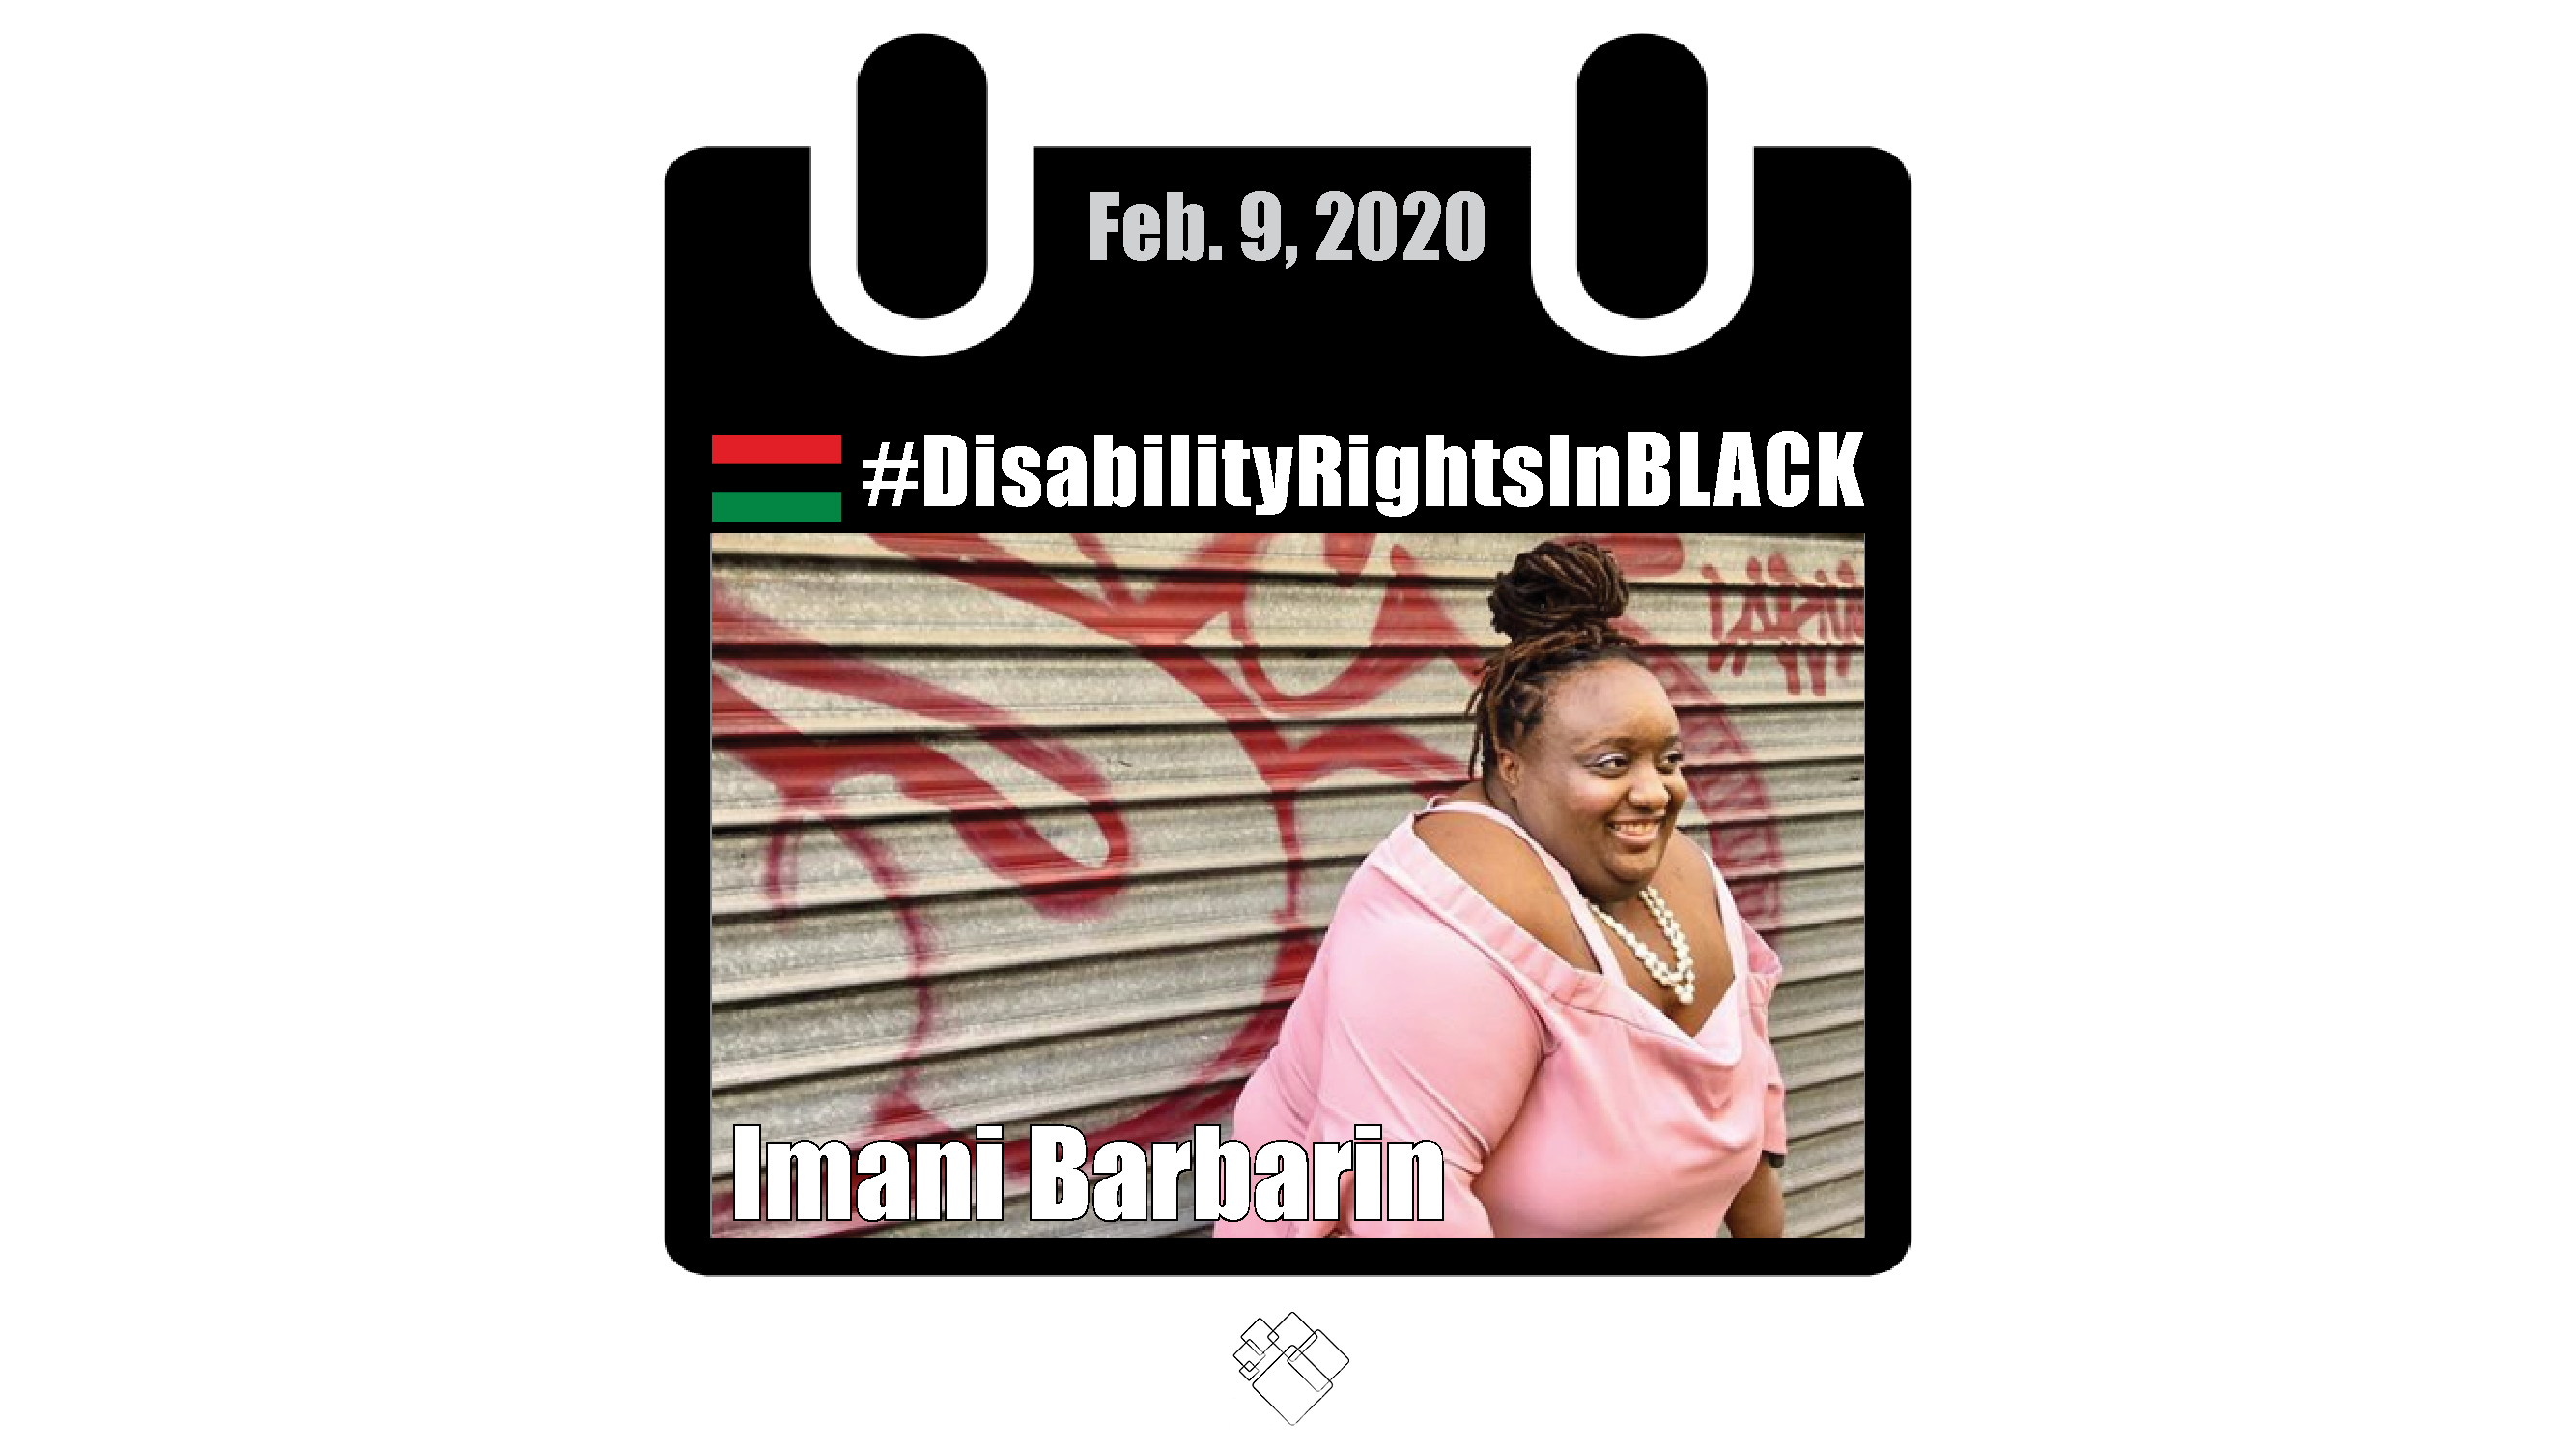 Imani with her crutches wears a pink shirt and pearls, looking off camera in front of a grafittied garage door. The Disability Rights in Black calendar frames the photo.